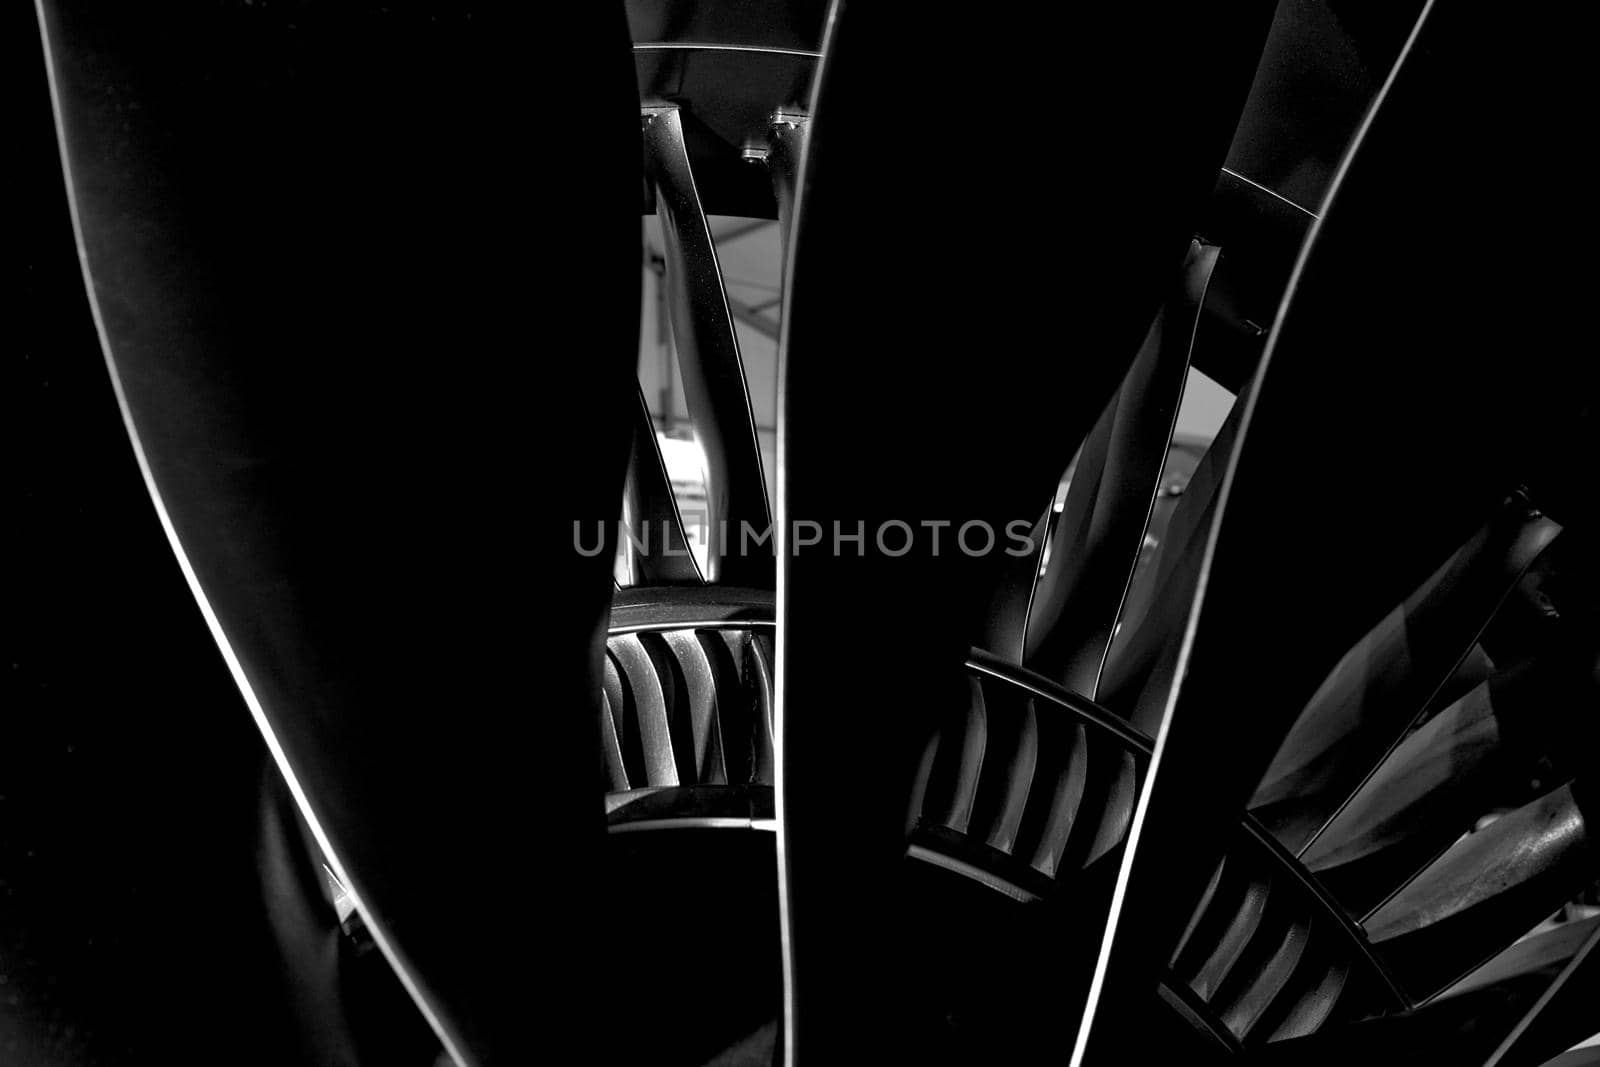 Modern turbofan engine. close up of turbojet of aircraft on black background. blades of the turbofan engine of the aircraft.